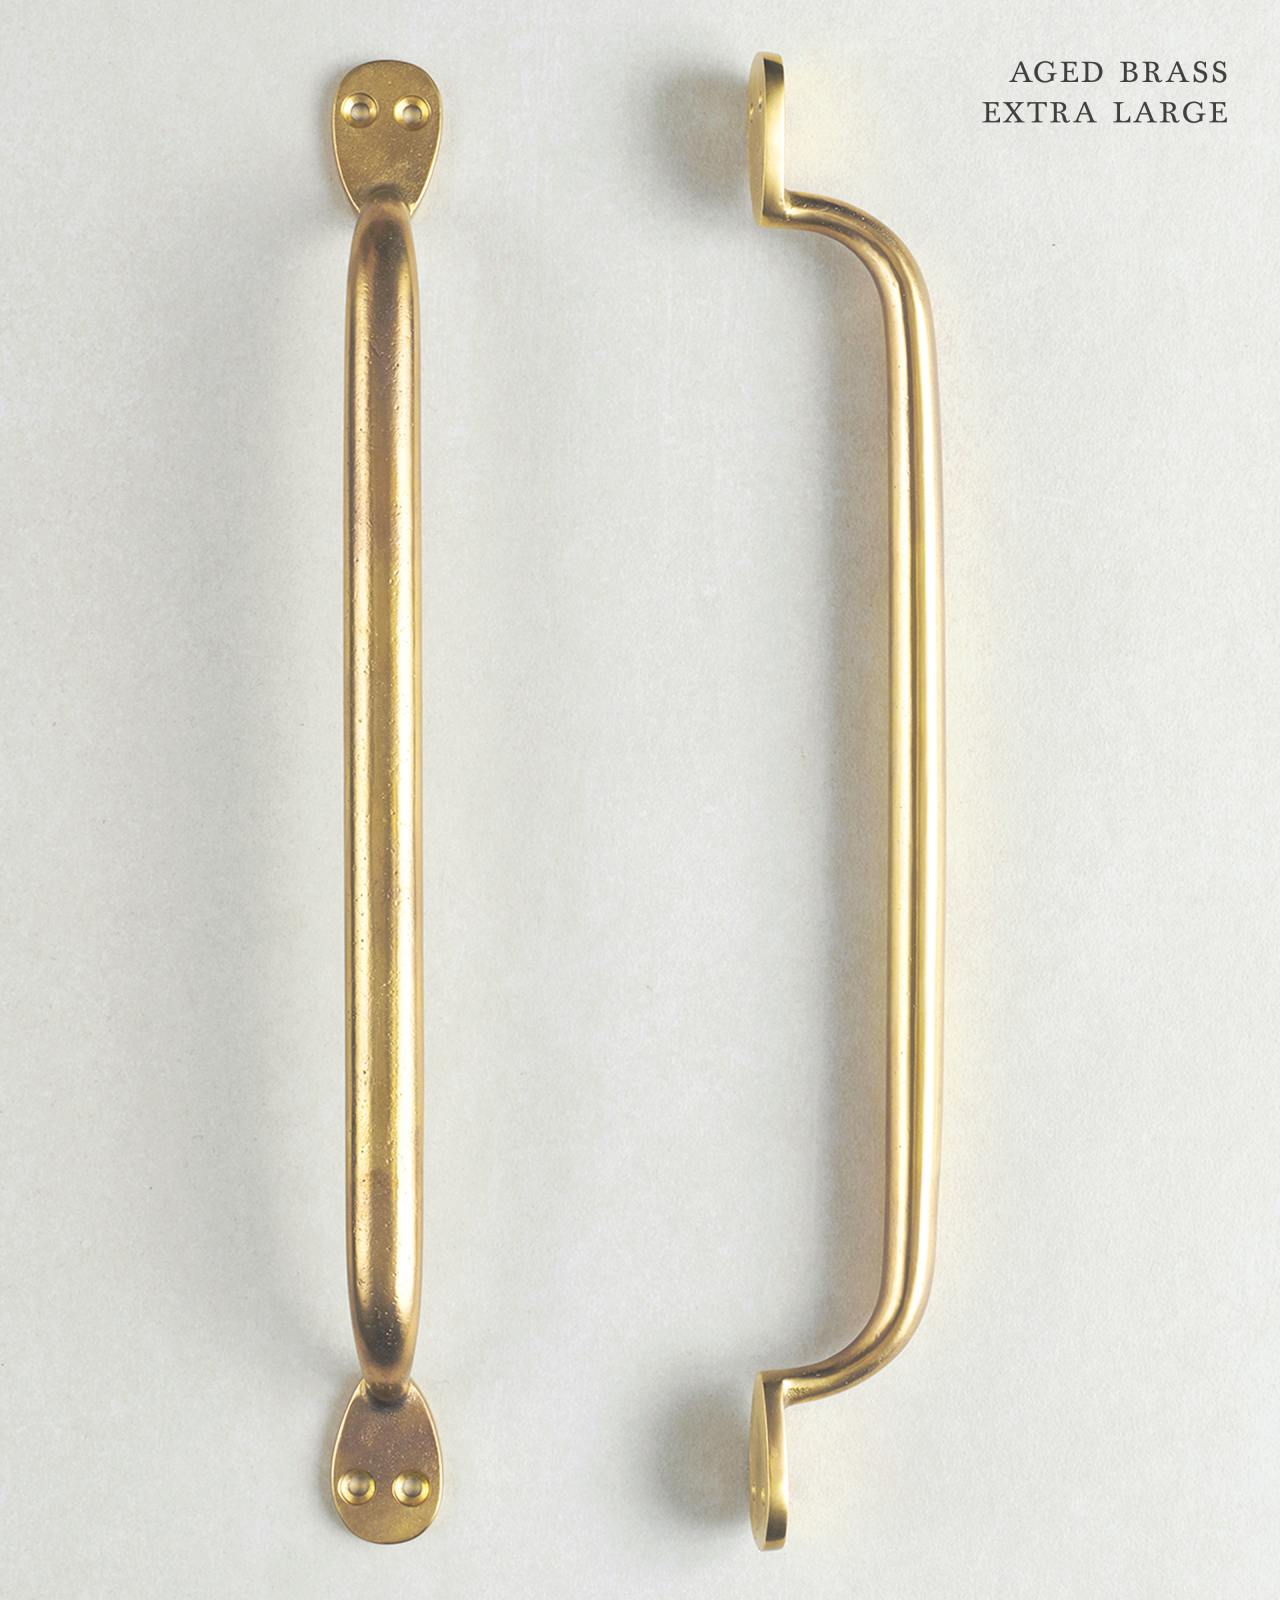 https://www.devolkitchens.co.uk/images/styles/kitchen_project_gallery_image_2x/public/Aged-Brass-Pull-Handle-XL.jpg?itok=uKa6saRs